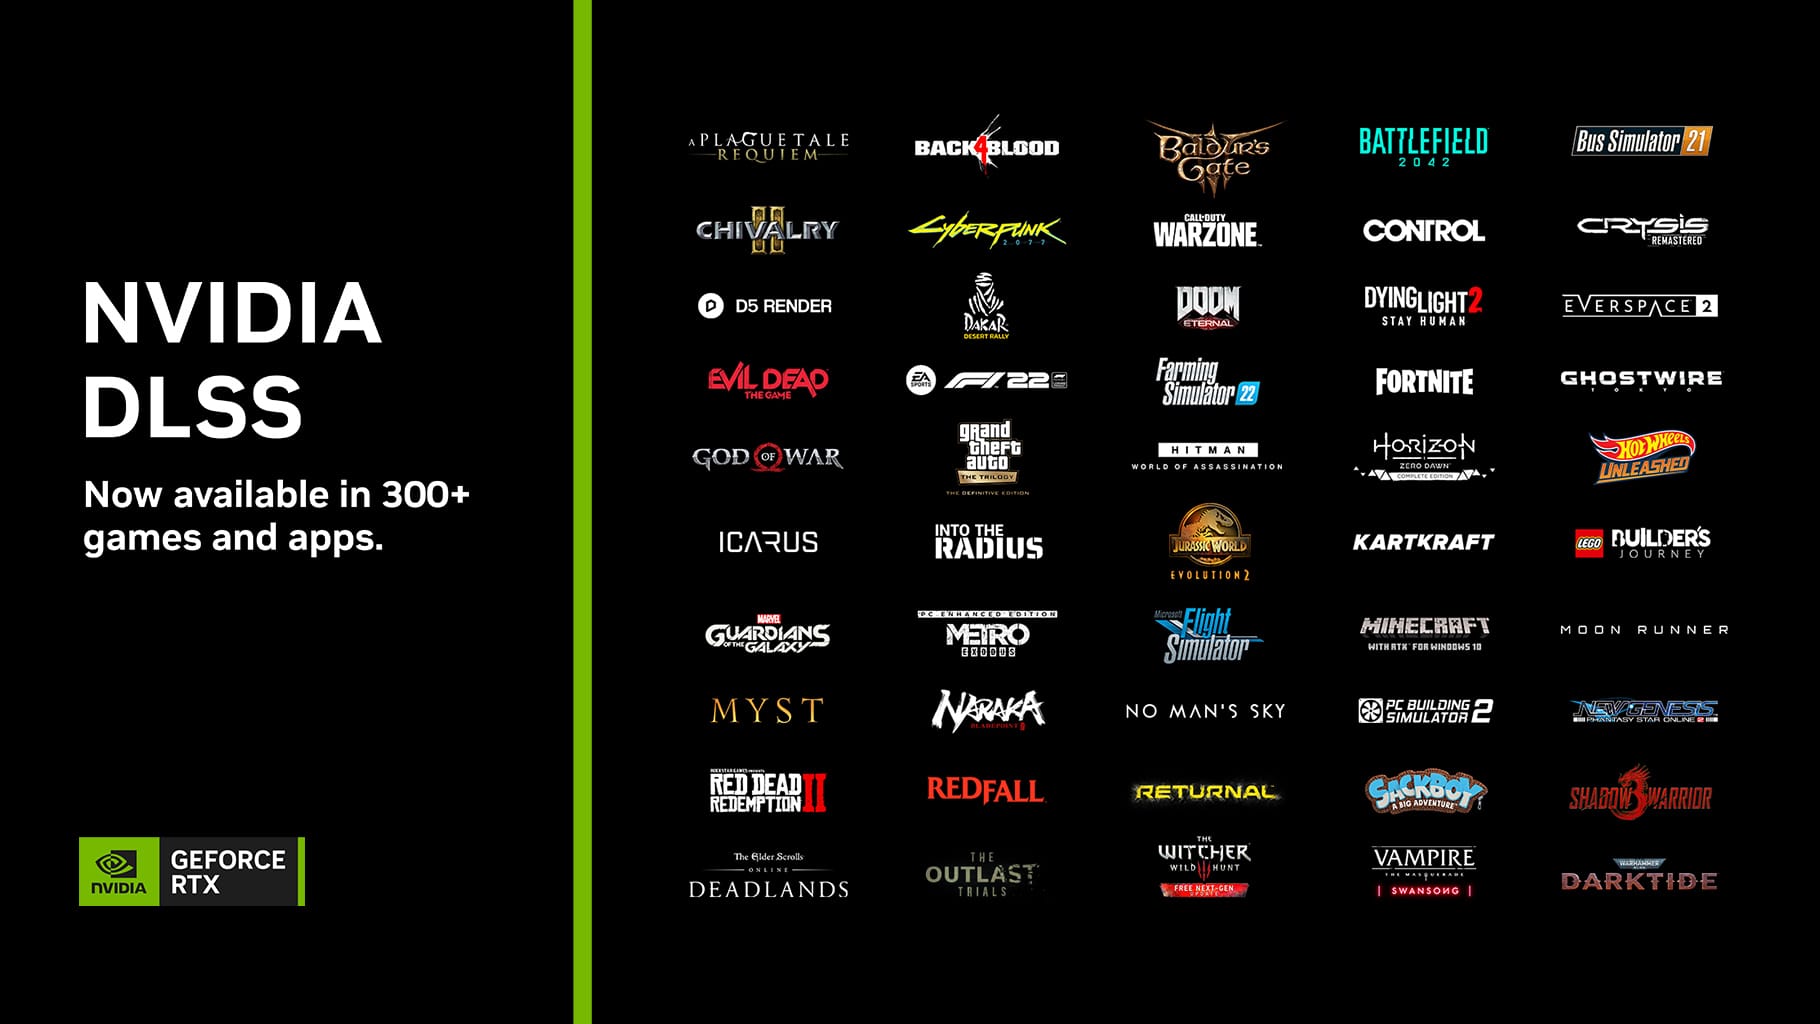 nvidia-dlss-over-300-released-games-and-apps-key-visual.jpg